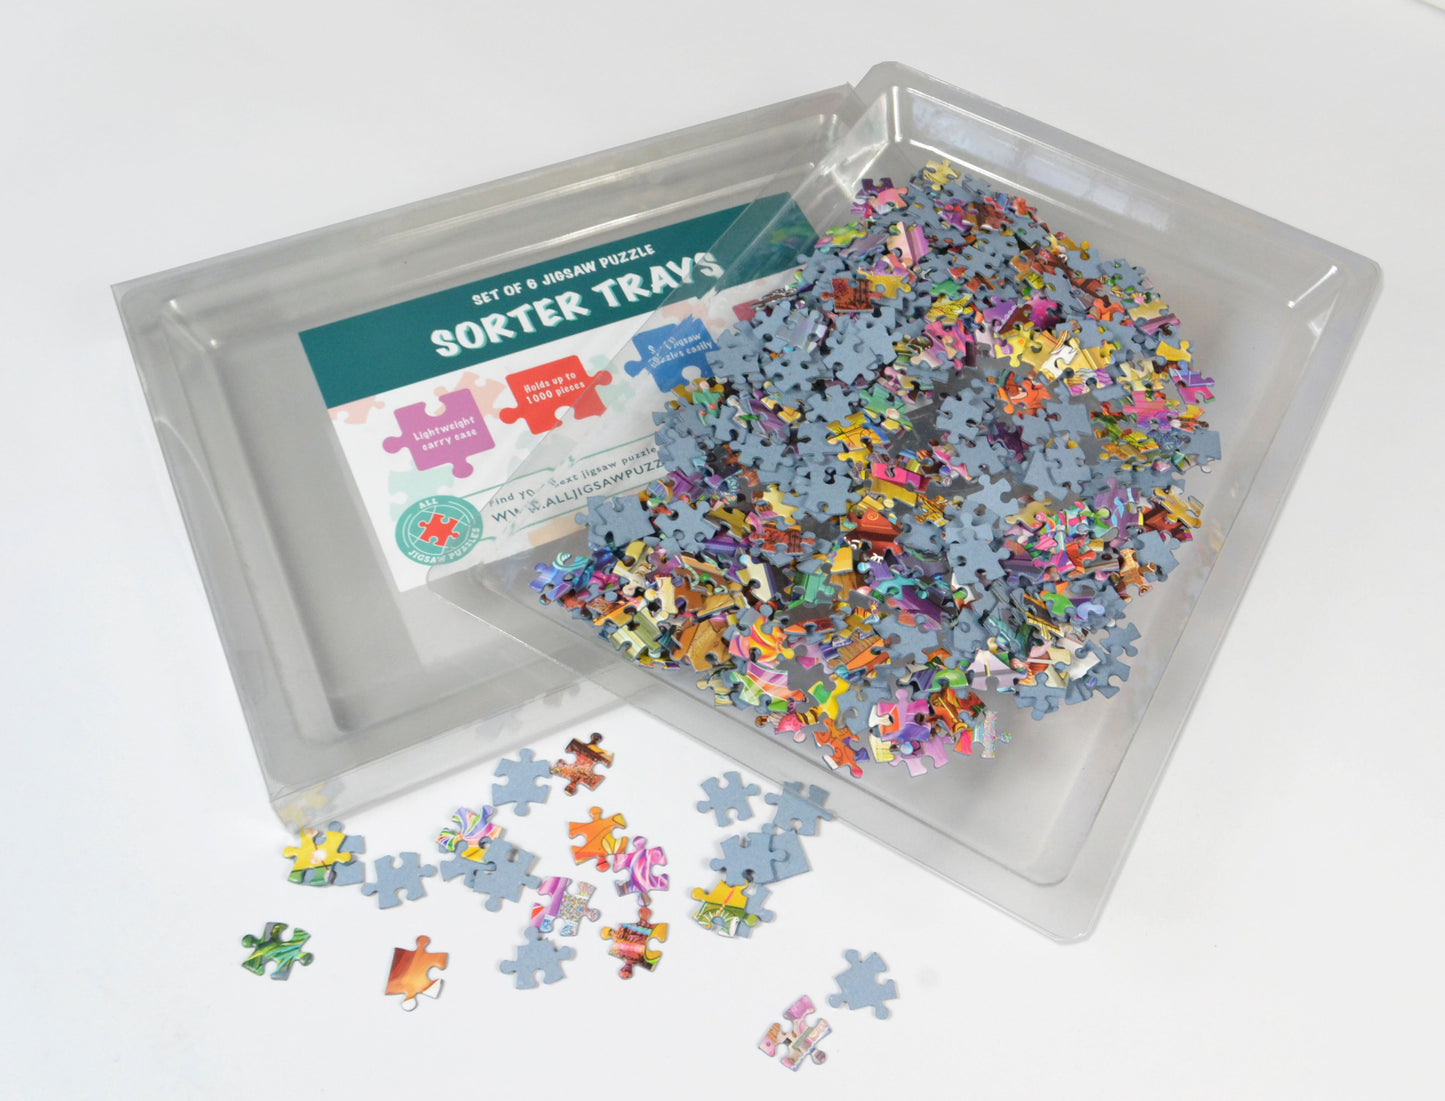 All Jigsaw Puzzle Sorter Trays - Pack of 6 and Carry Case 1